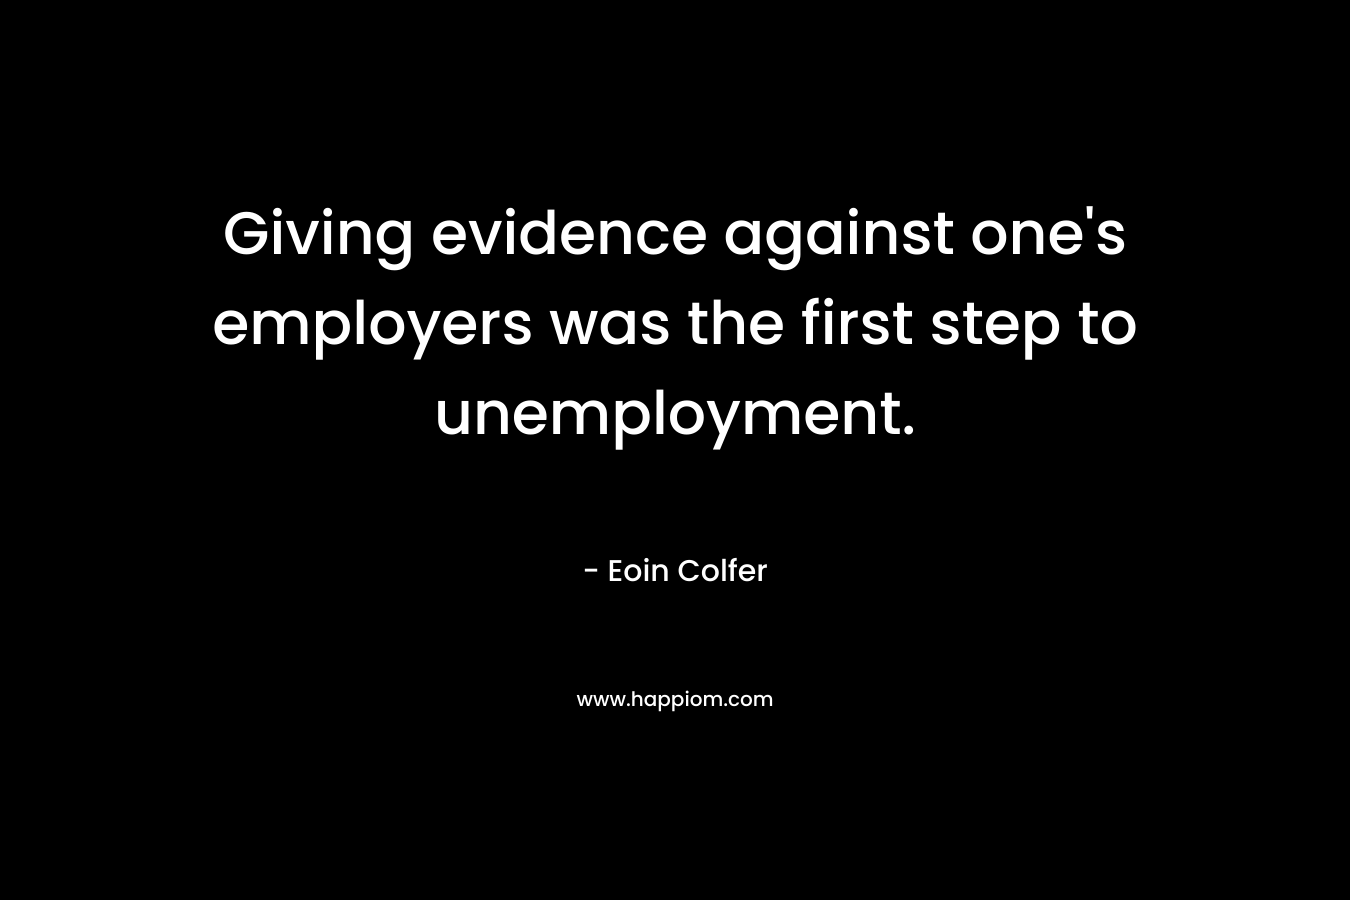 Giving evidence against one’s employers was the first step to unemployment. – Eoin Colfer